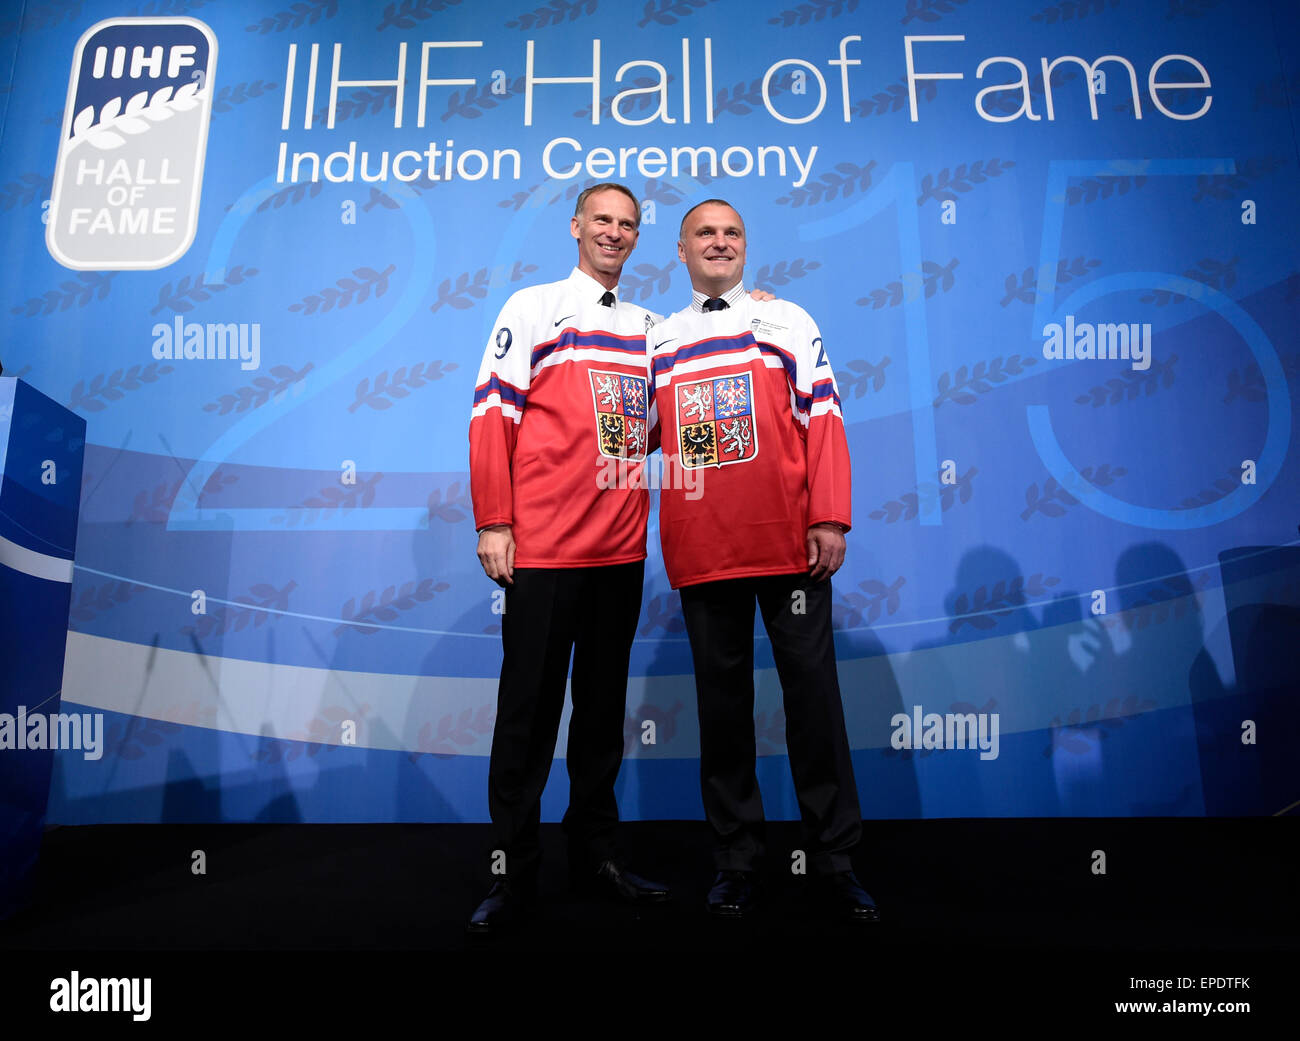 Captain Canada' called to IIHF Hall of Fame